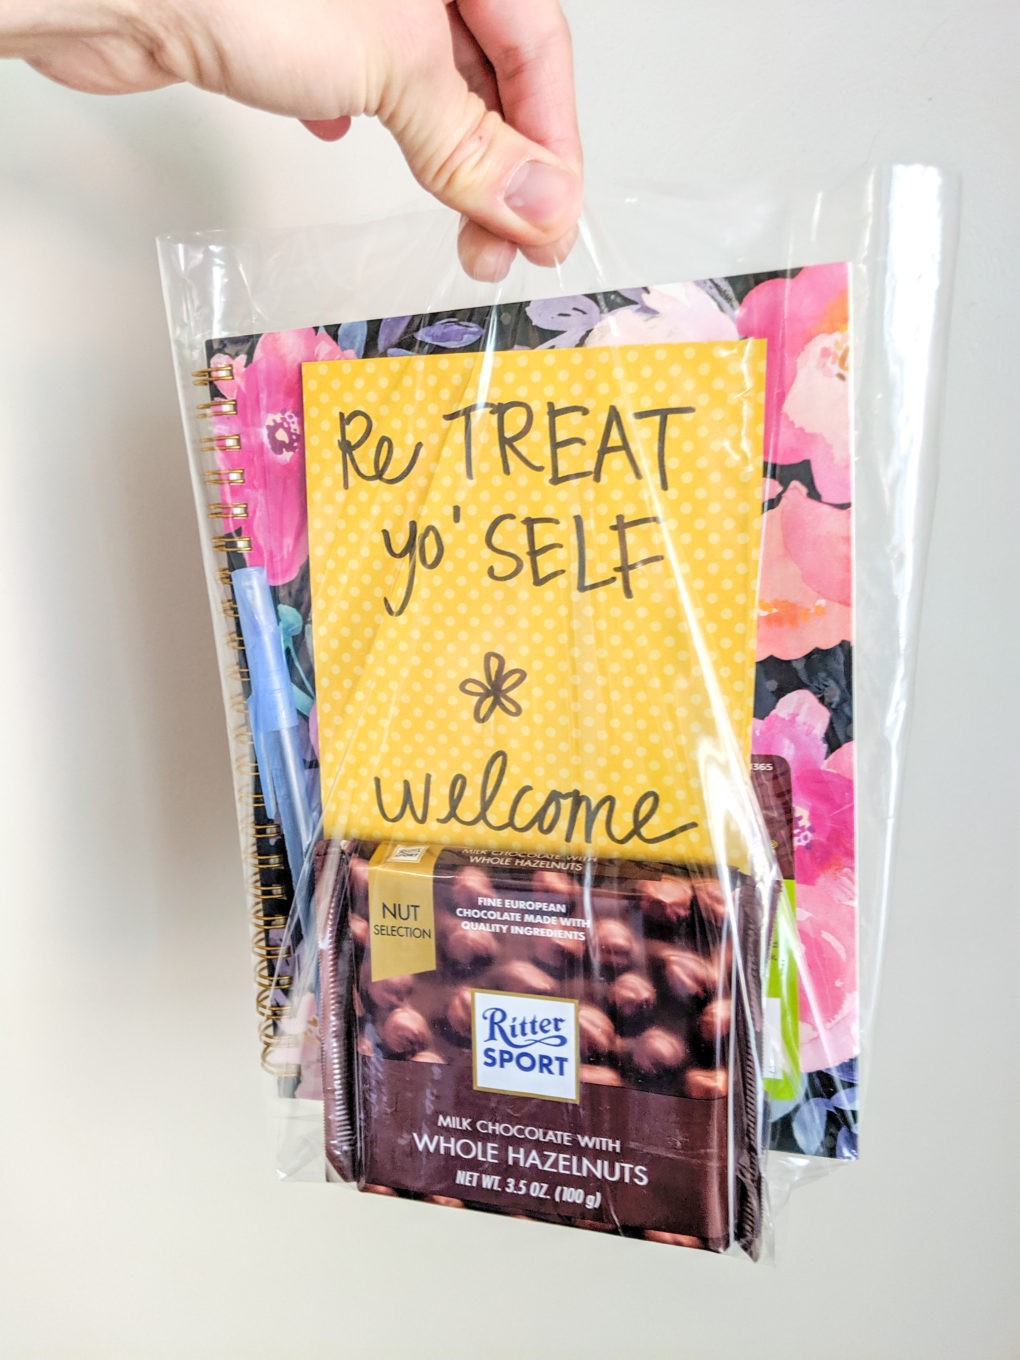 Welcome gift bags for our DIY women's wellness retreat on a budget. Retreat Yo Self sisters retreat.